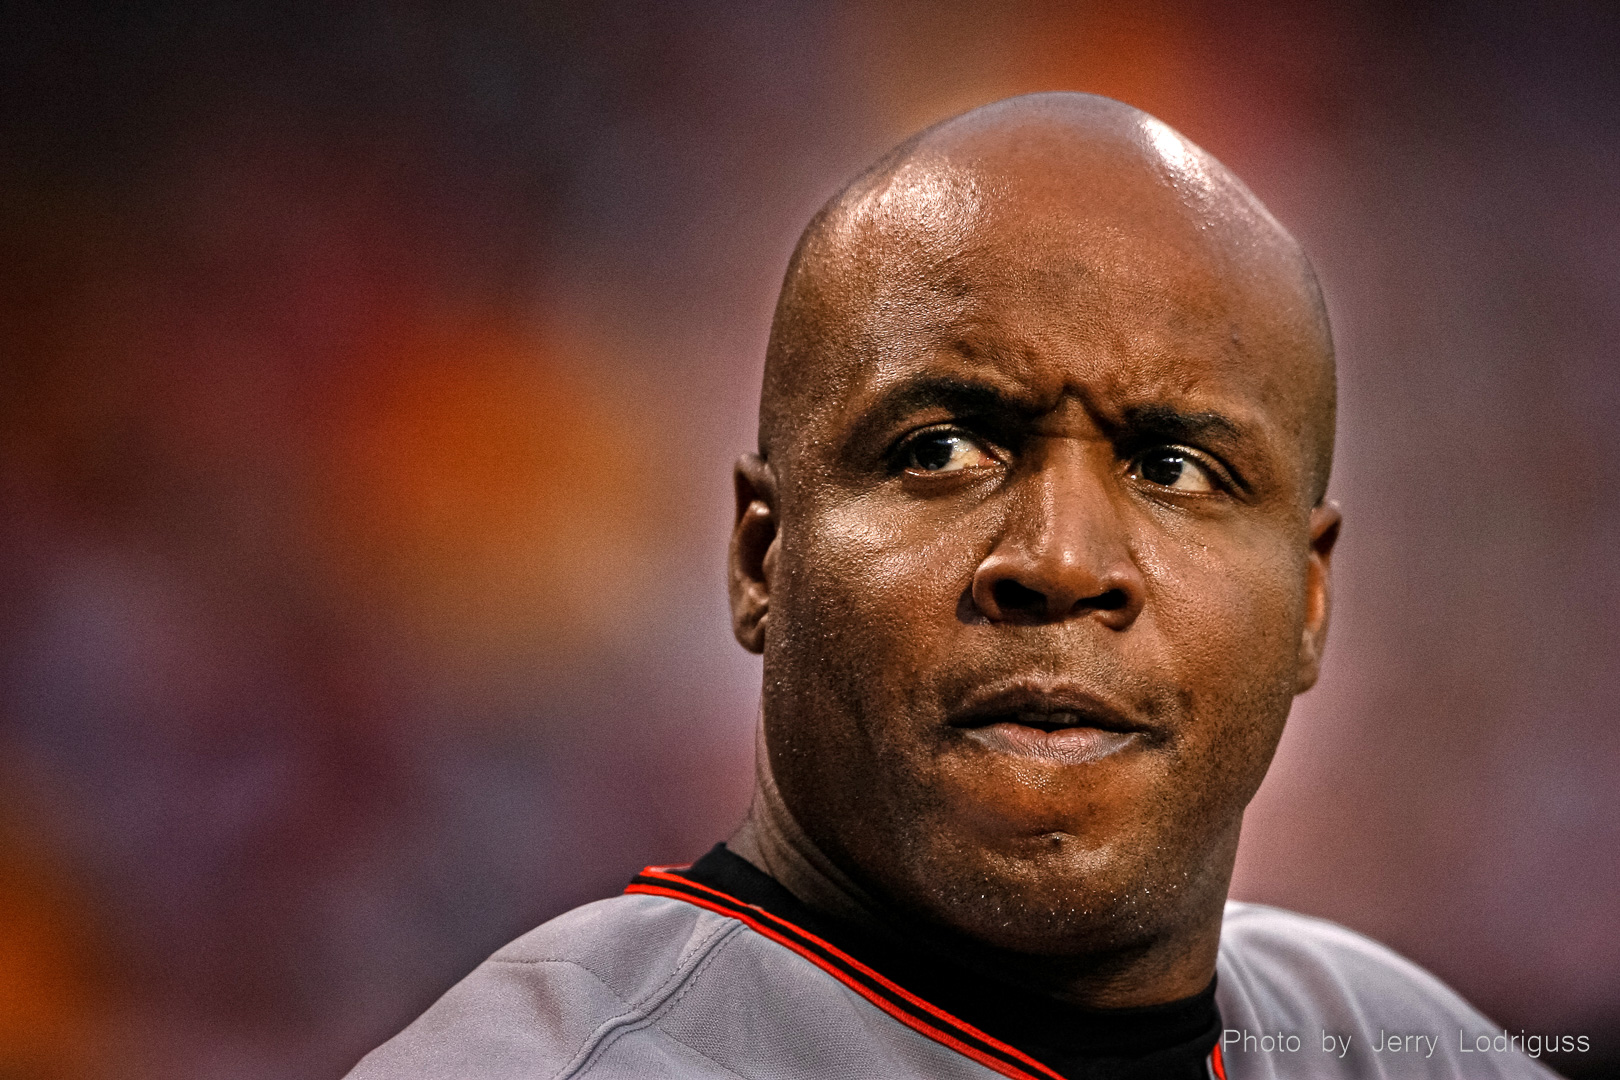 San Francisco Giants' Barry Bonds pauses in the dugout before hitting an RBI-double against the Phillies.  Bonds, considered one of the greatest baseball players of all time, won 7 National League Most Valuable Player awards, 8 Gold Golves, 12 Silver Slugger award, and was selected to the all-star team 14 times. Bonds holds the record for most career home runs (762), and most homers in a single season (73). He also holds the record for most career walks (2,558) and stole 514 bases. He is the only player with more than 500 home runs and 500 stolen bases.<br /><br />Bonds was a central character in baseball's steroid scandals. He was indicted and convicted of obstruction of justice in a federal investigation, but the charges were overturned. Although eligible for the National Baseball Hall of Fame, he has not been elected because of his alleged steroid use.